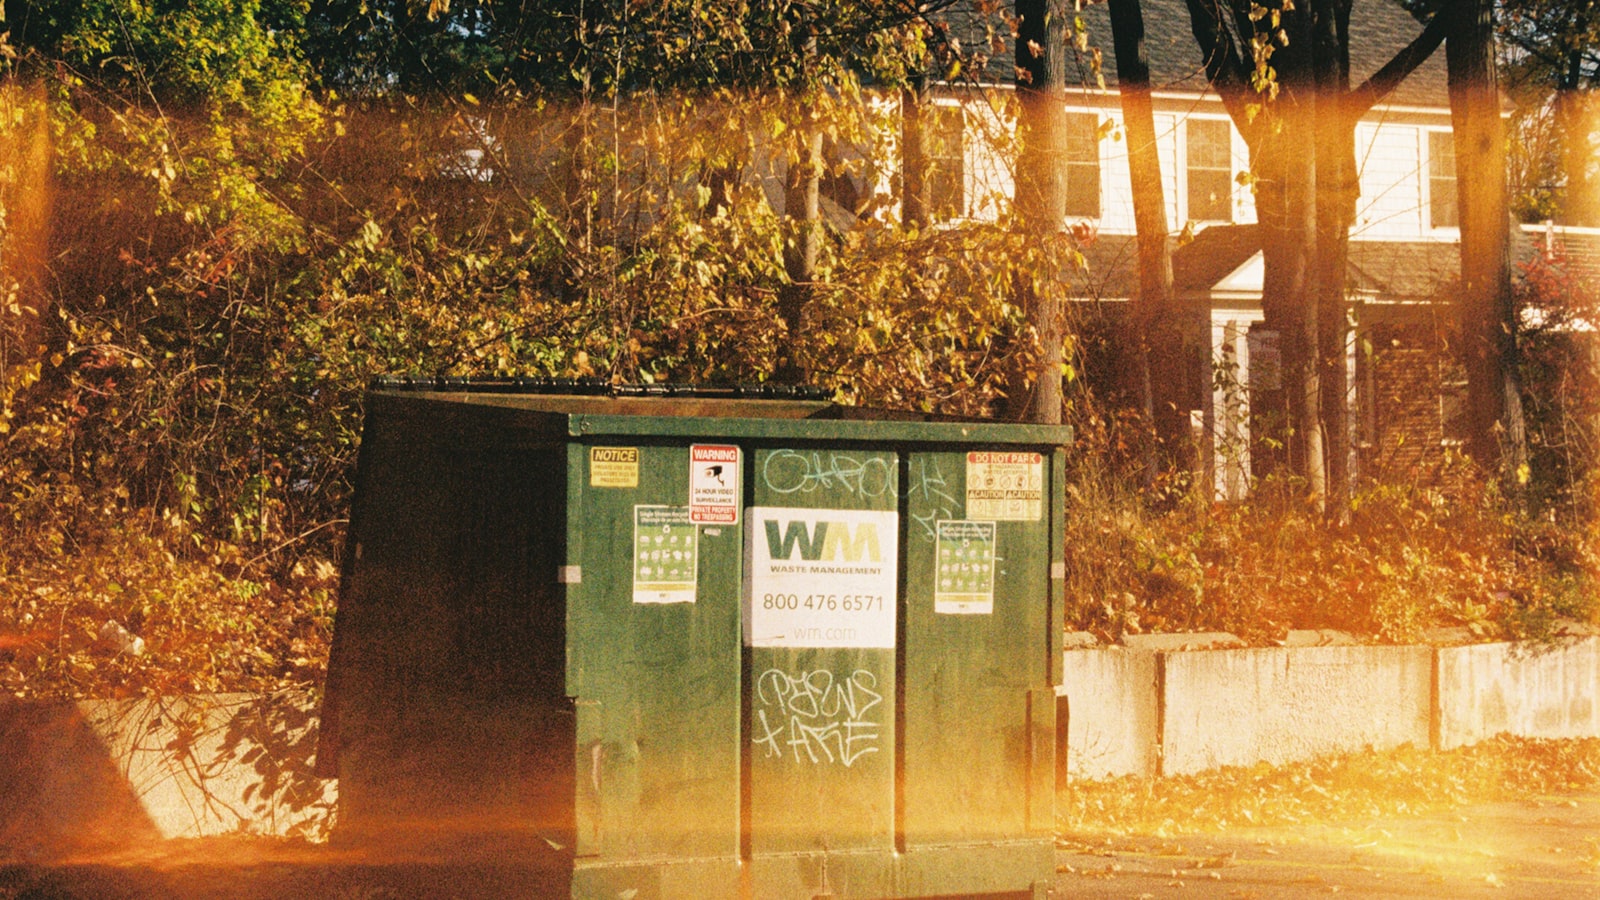 Priority Dumpster Rental Wixom Covers the Best Use Cases for Renting a Dumpster for Bulk Trash